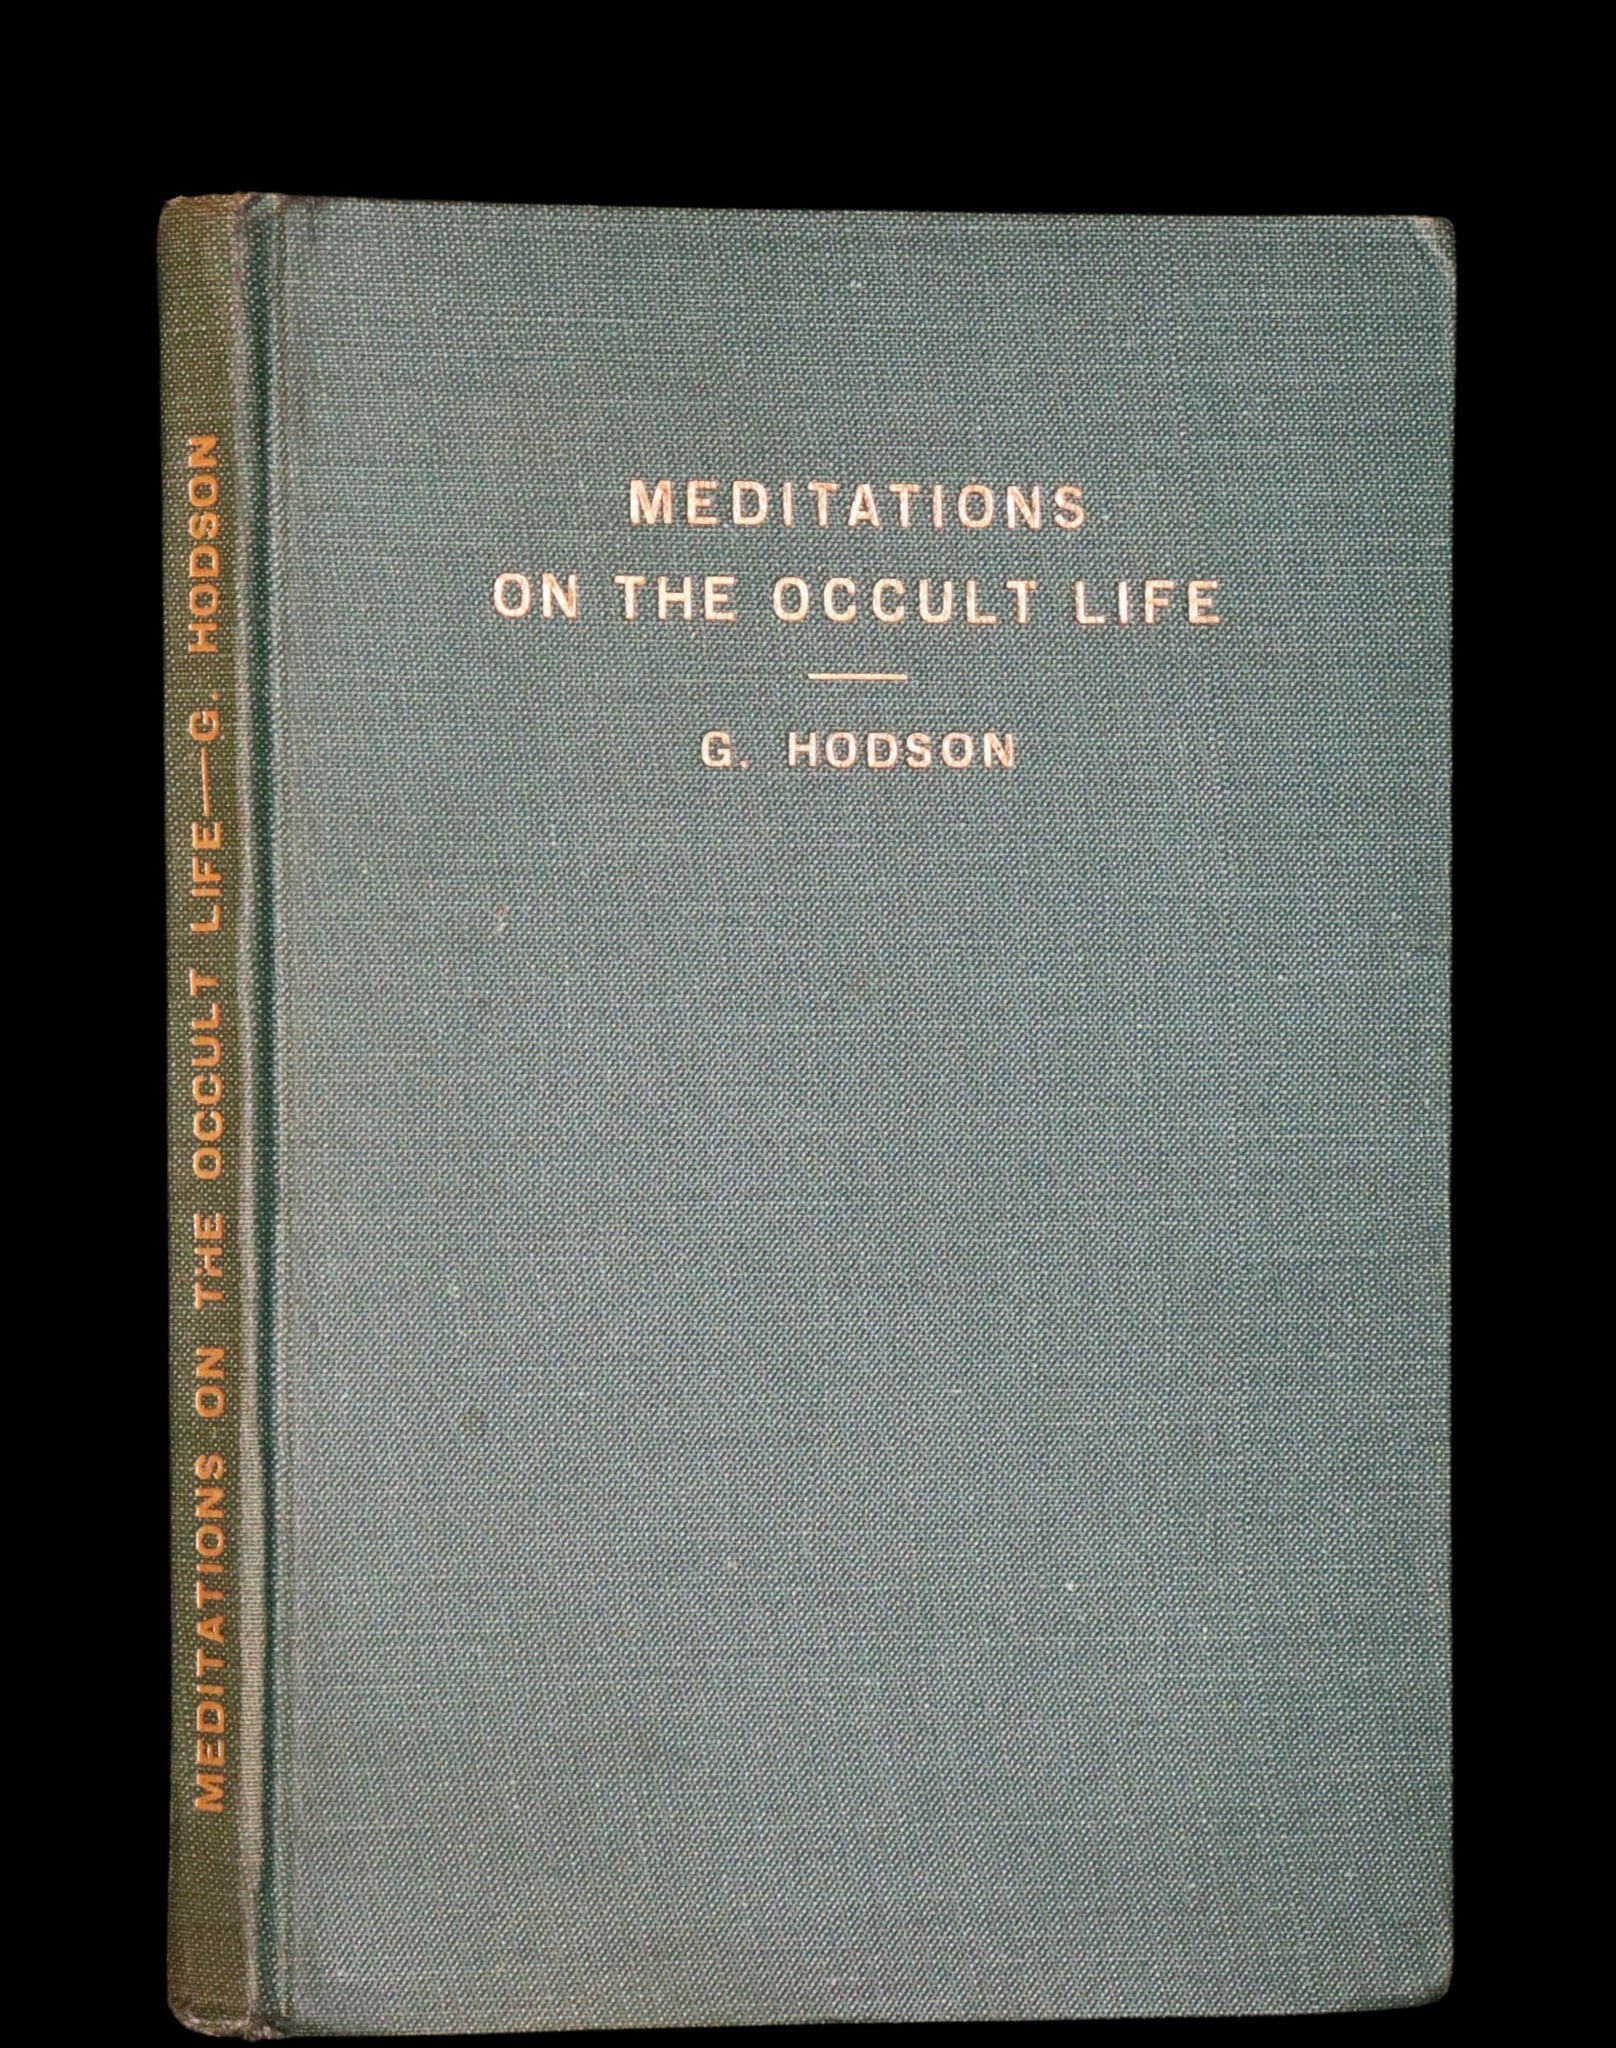 1937 Rare First Edition - Meditations on the Occult Life by Geoffrey Hodson.